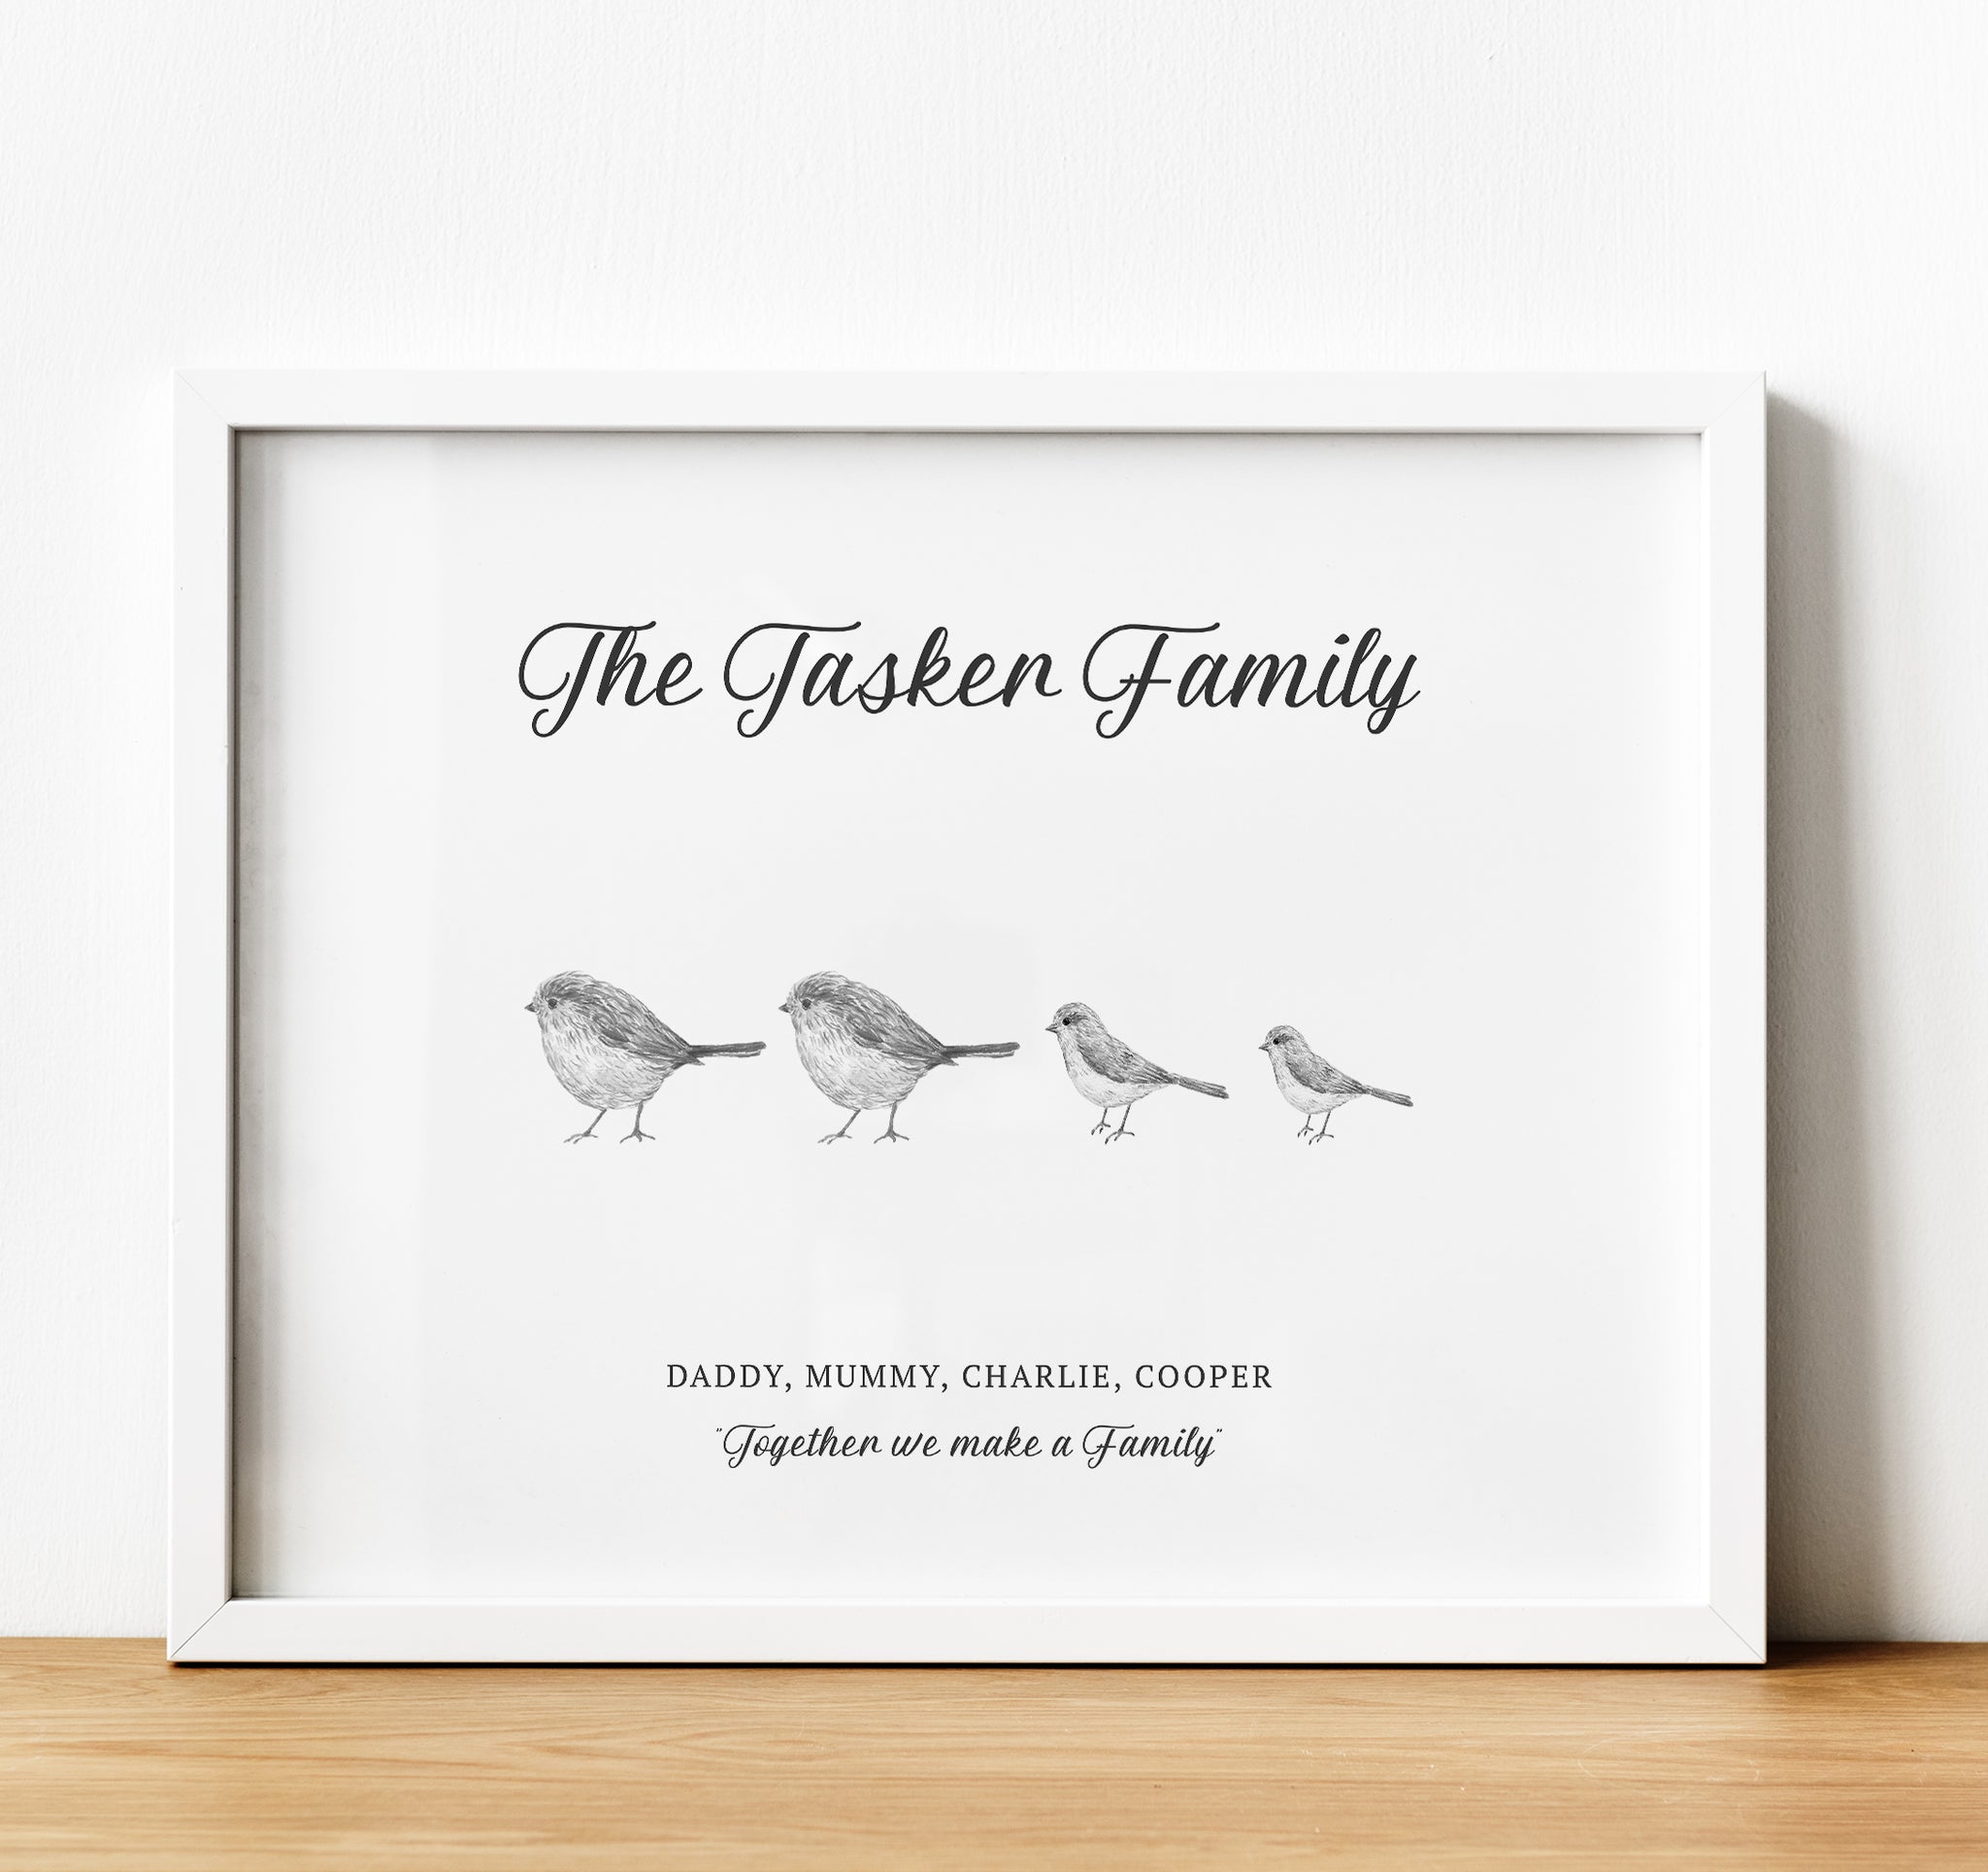 Green Bee Designs - Personalised Gifts | Galway